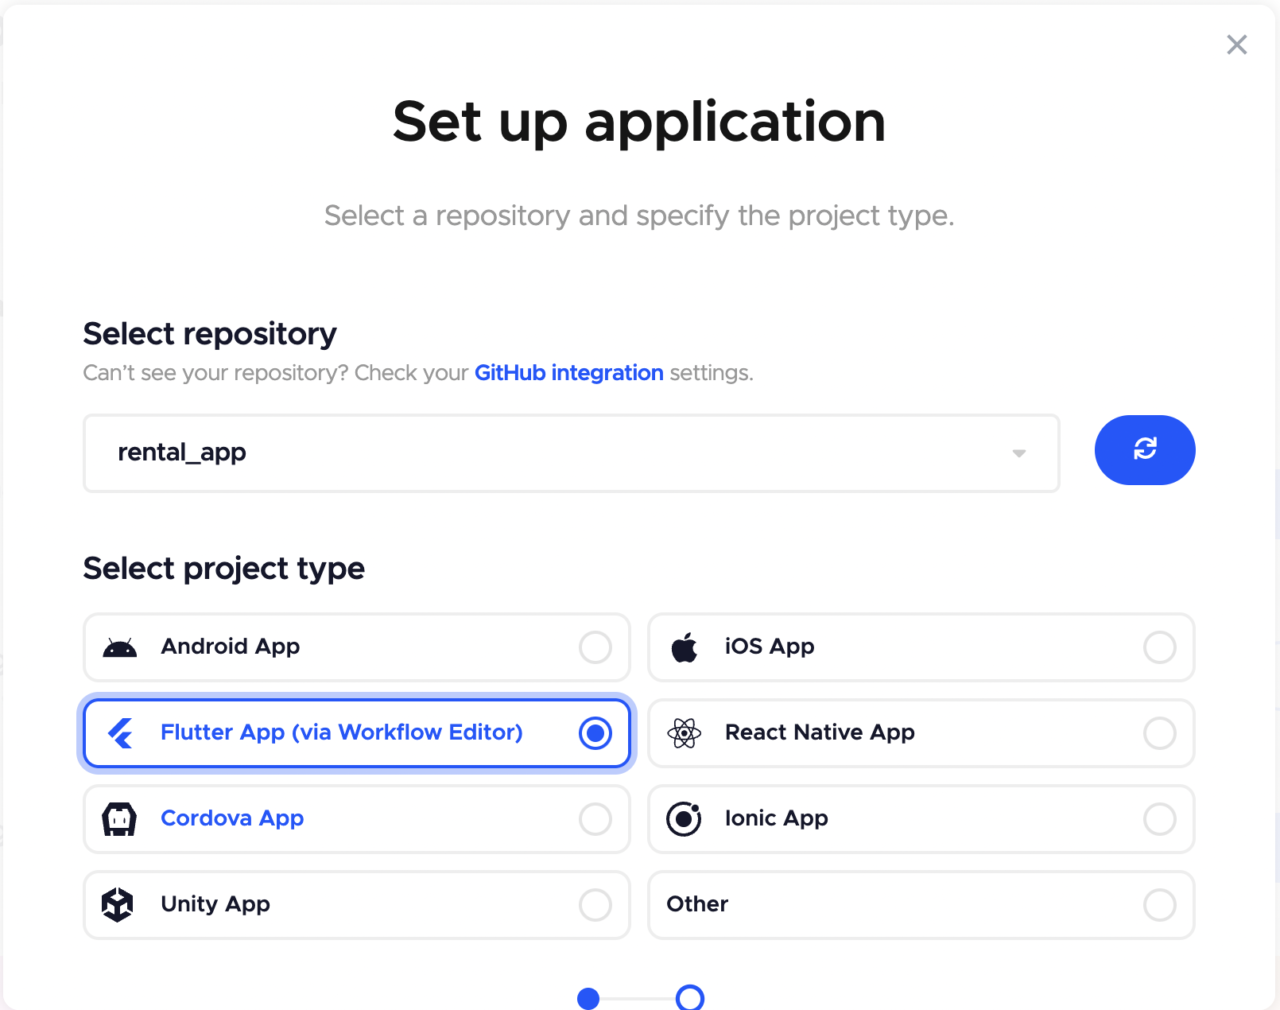 Select repository and project type